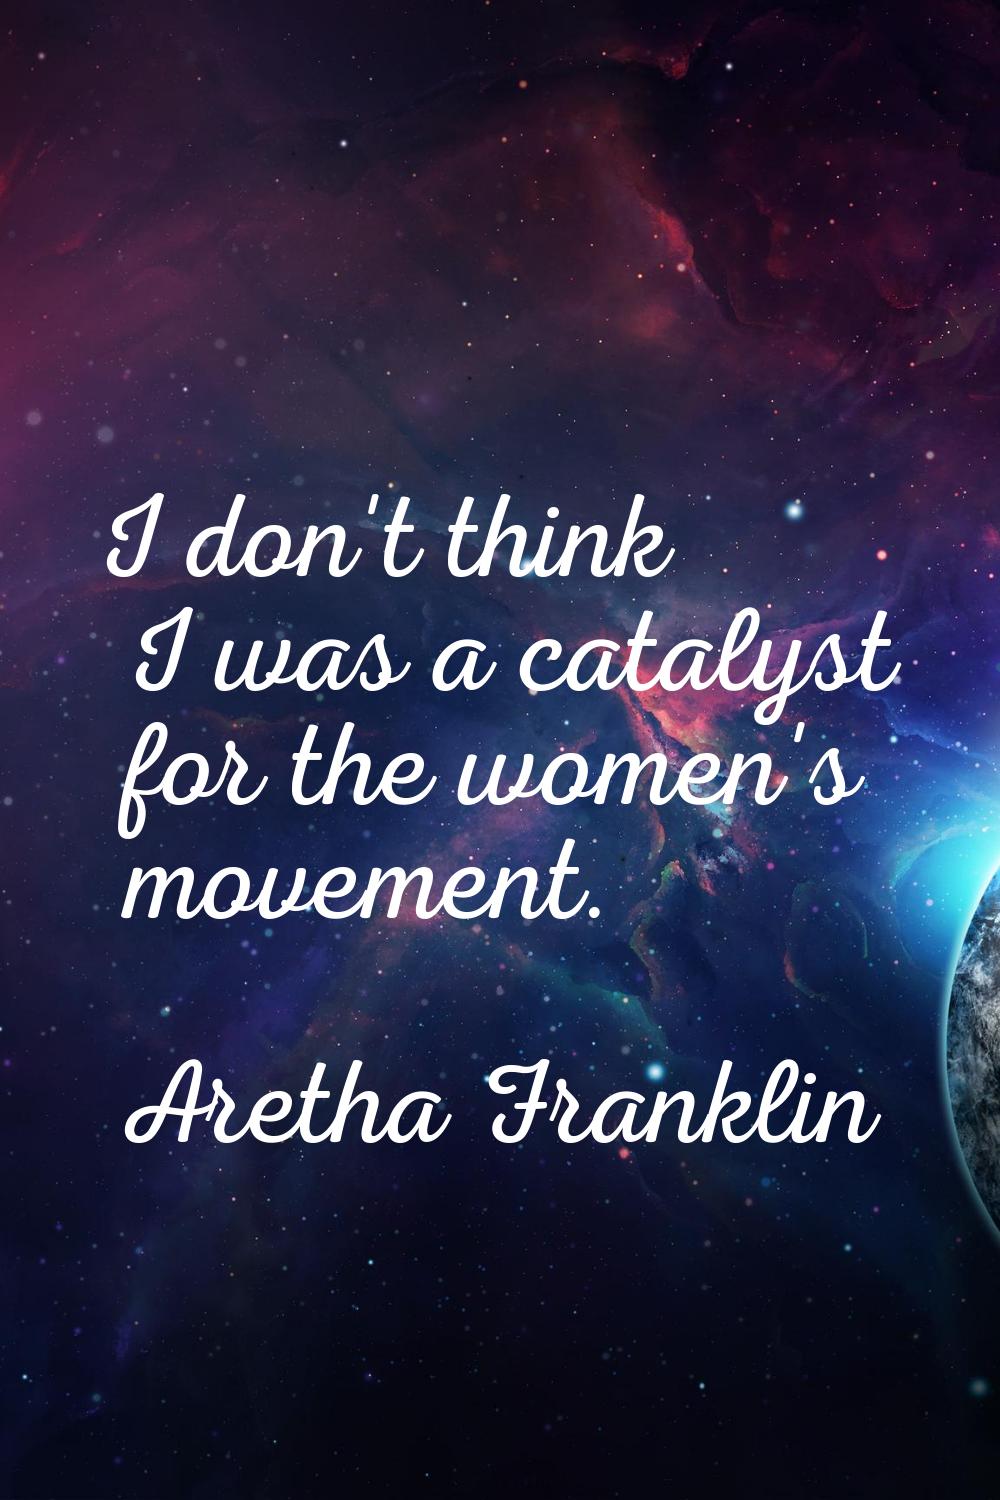 I don't think I was a catalyst for the women's movement.